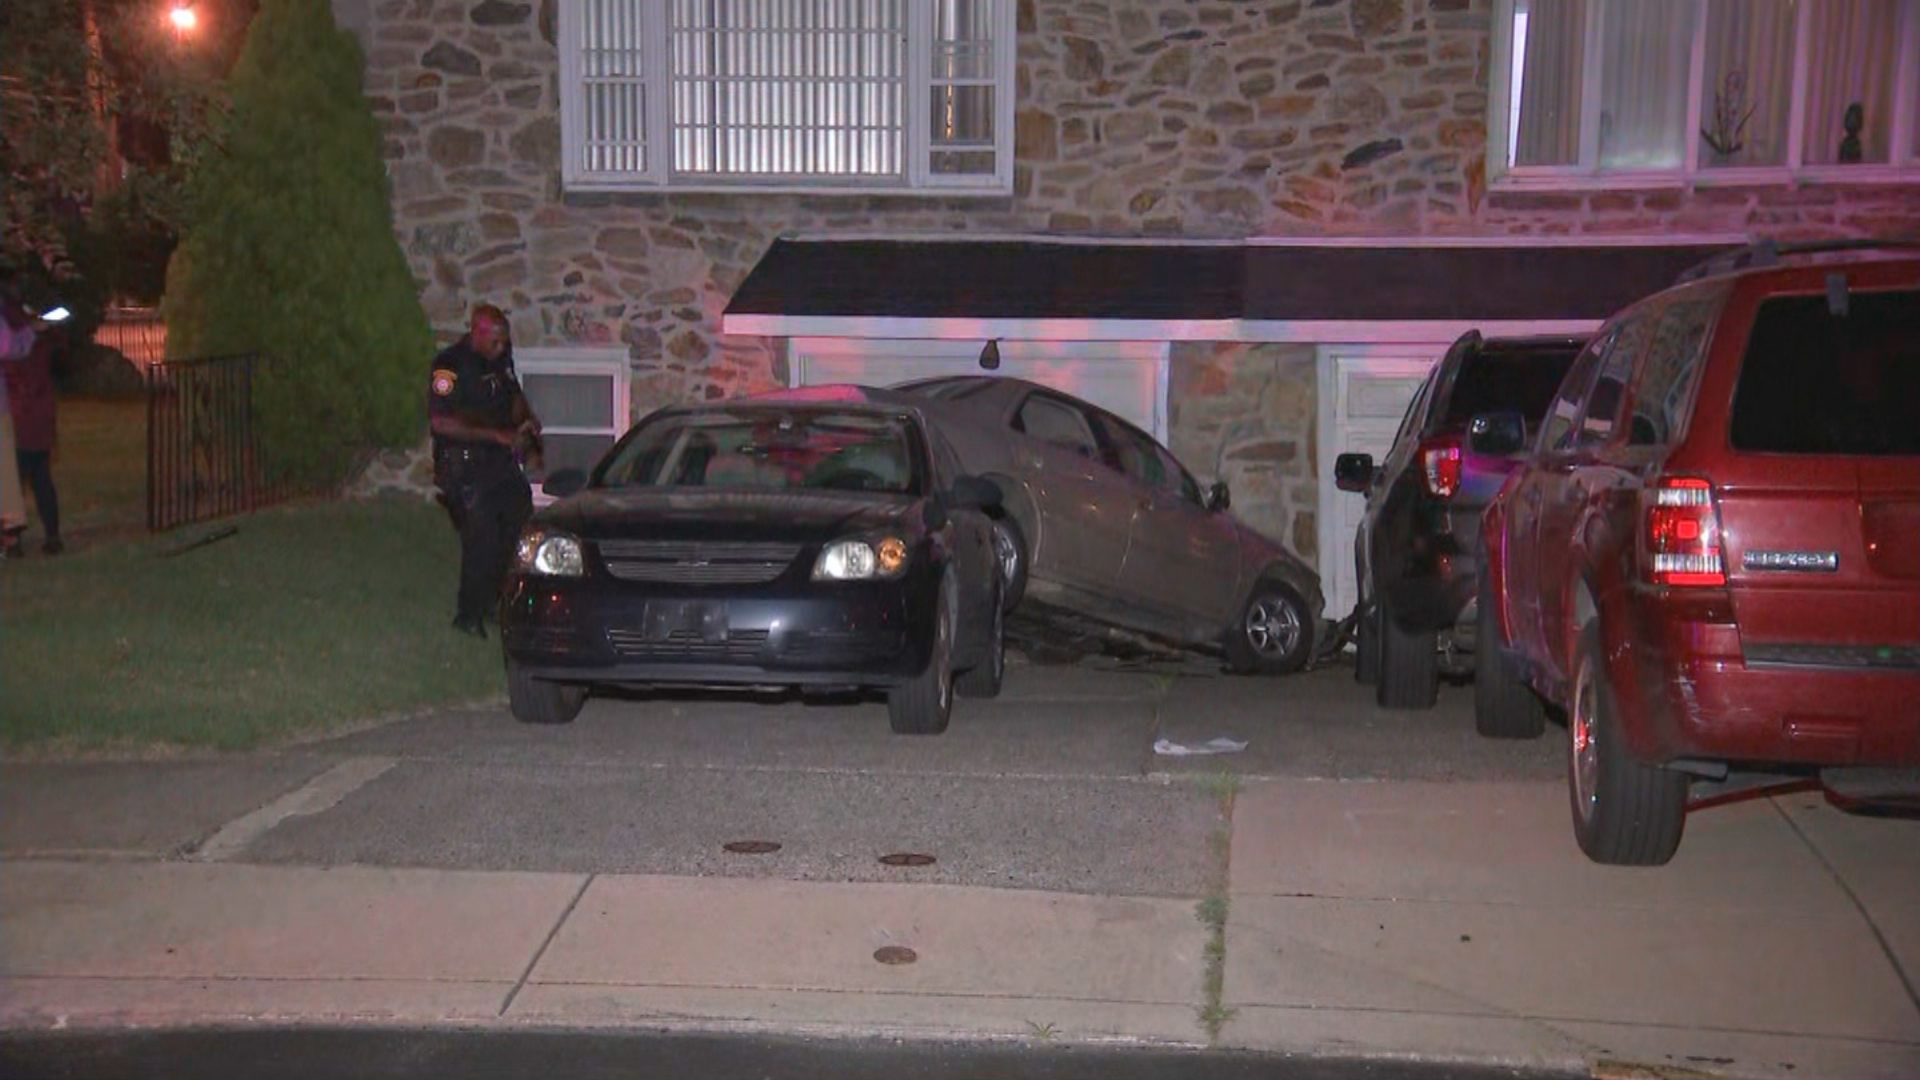 15-Year-Old Boy Driving Stolen Car Crashes Into House In Northeast Philadelphia, Police Say